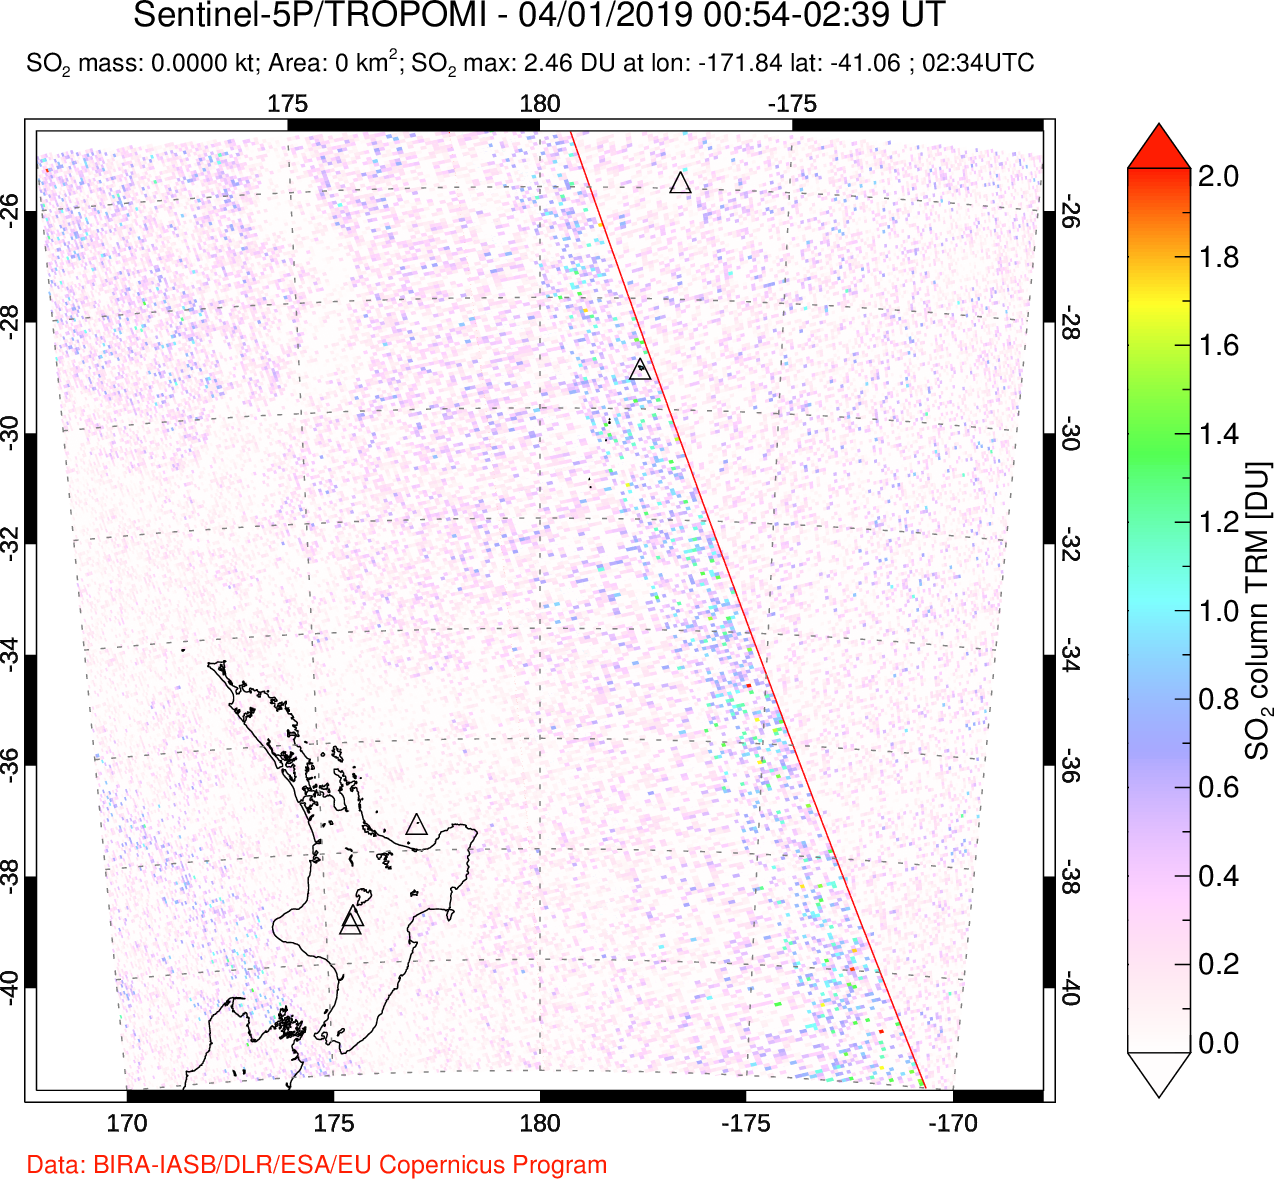 A sulfur dioxide image over New Zealand on Apr 01, 2019.